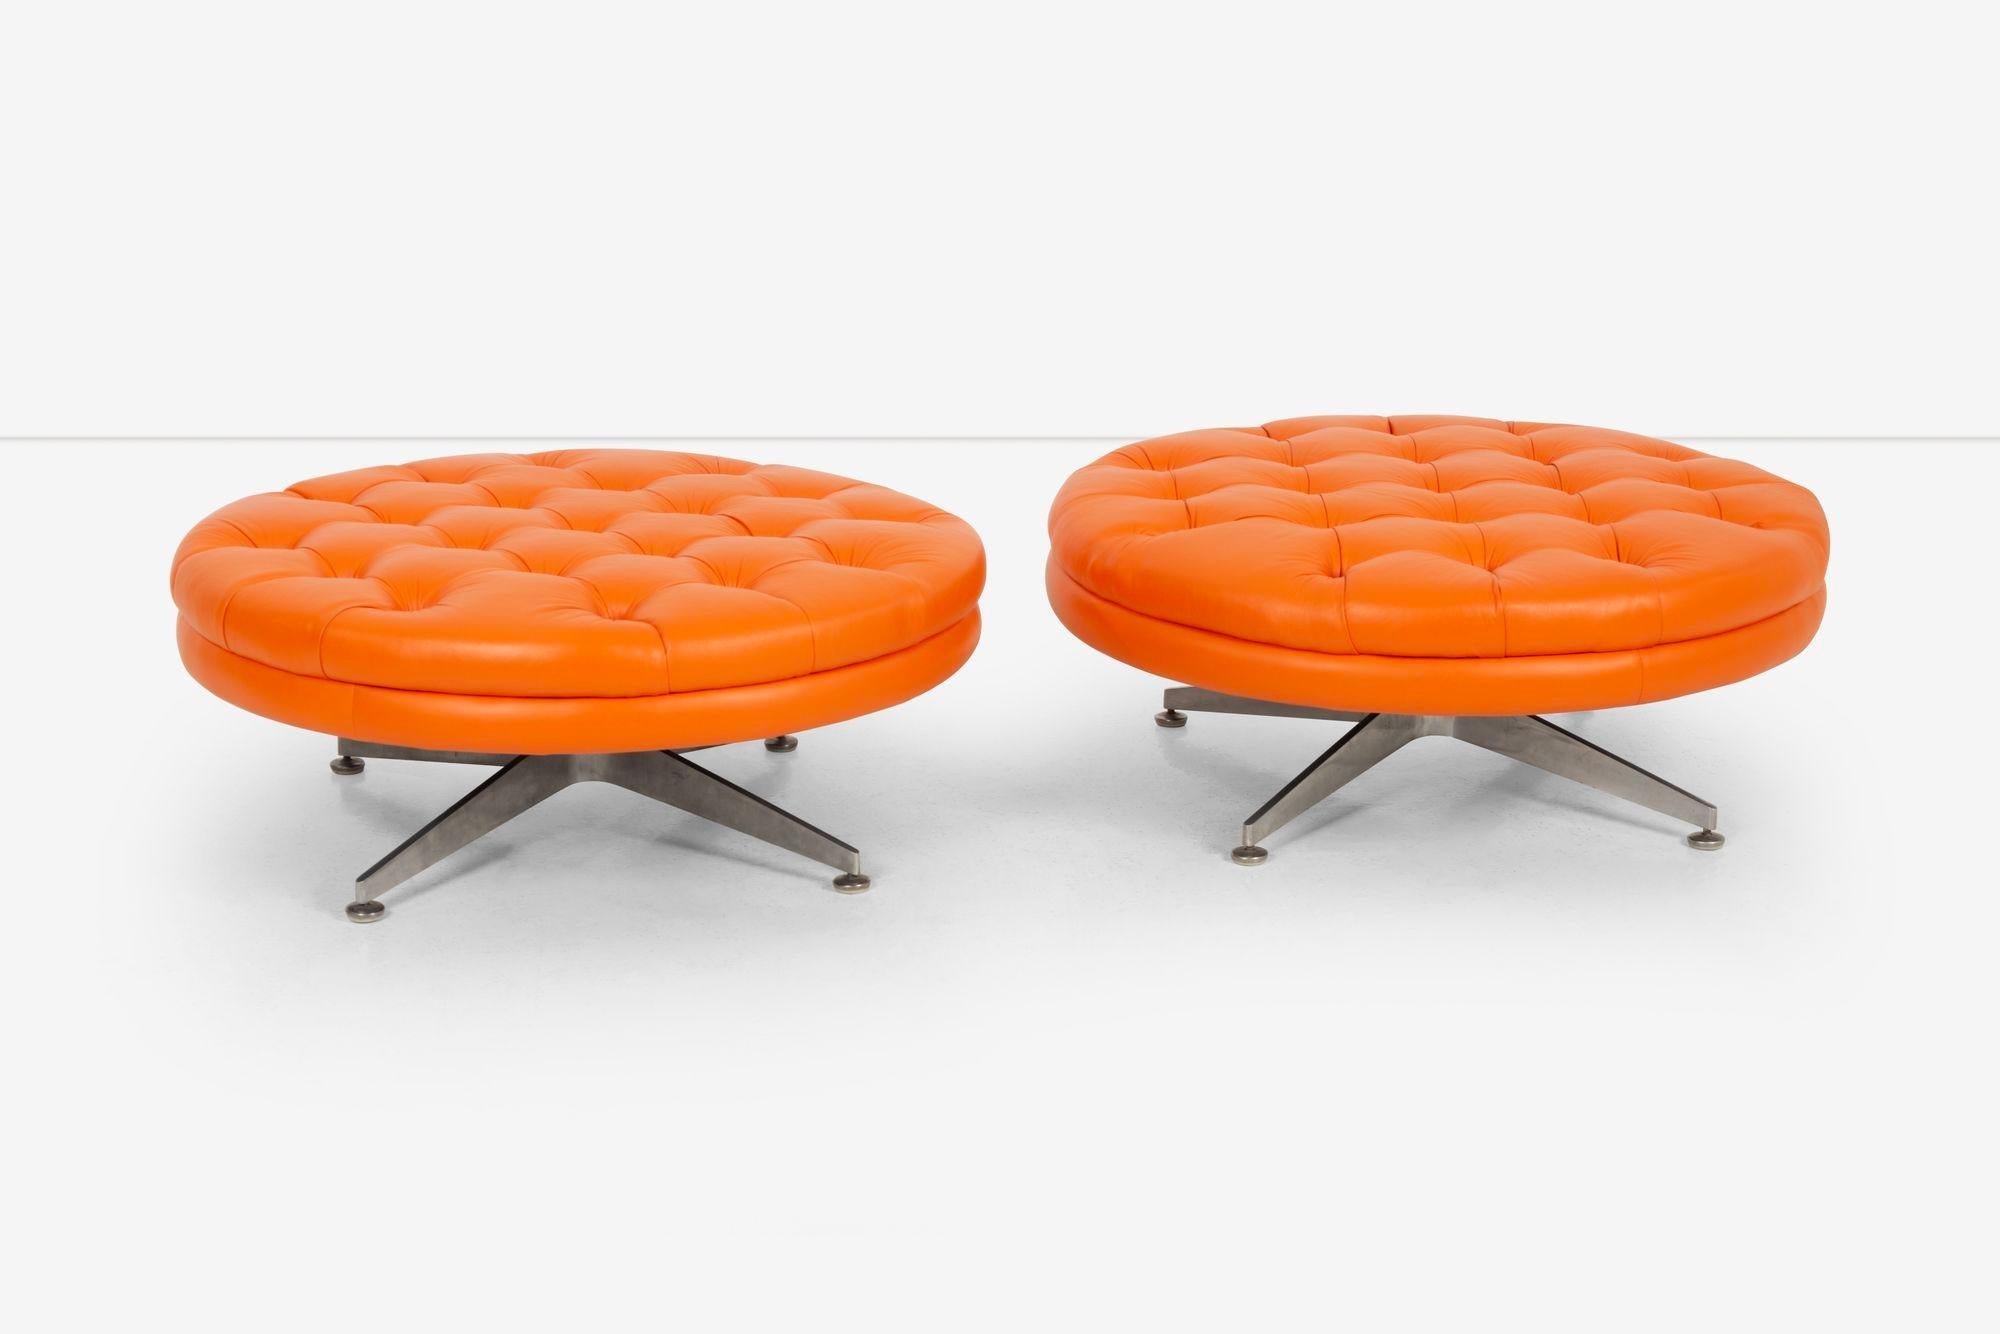 Pair of Ward Bennett Ottomans from Palm Springs, California
Restored in orange Spinneybeck leather, button tufted design.

Ward Bennett, an influential American furniture designer known for his minimalist and sophisticated approach to design,